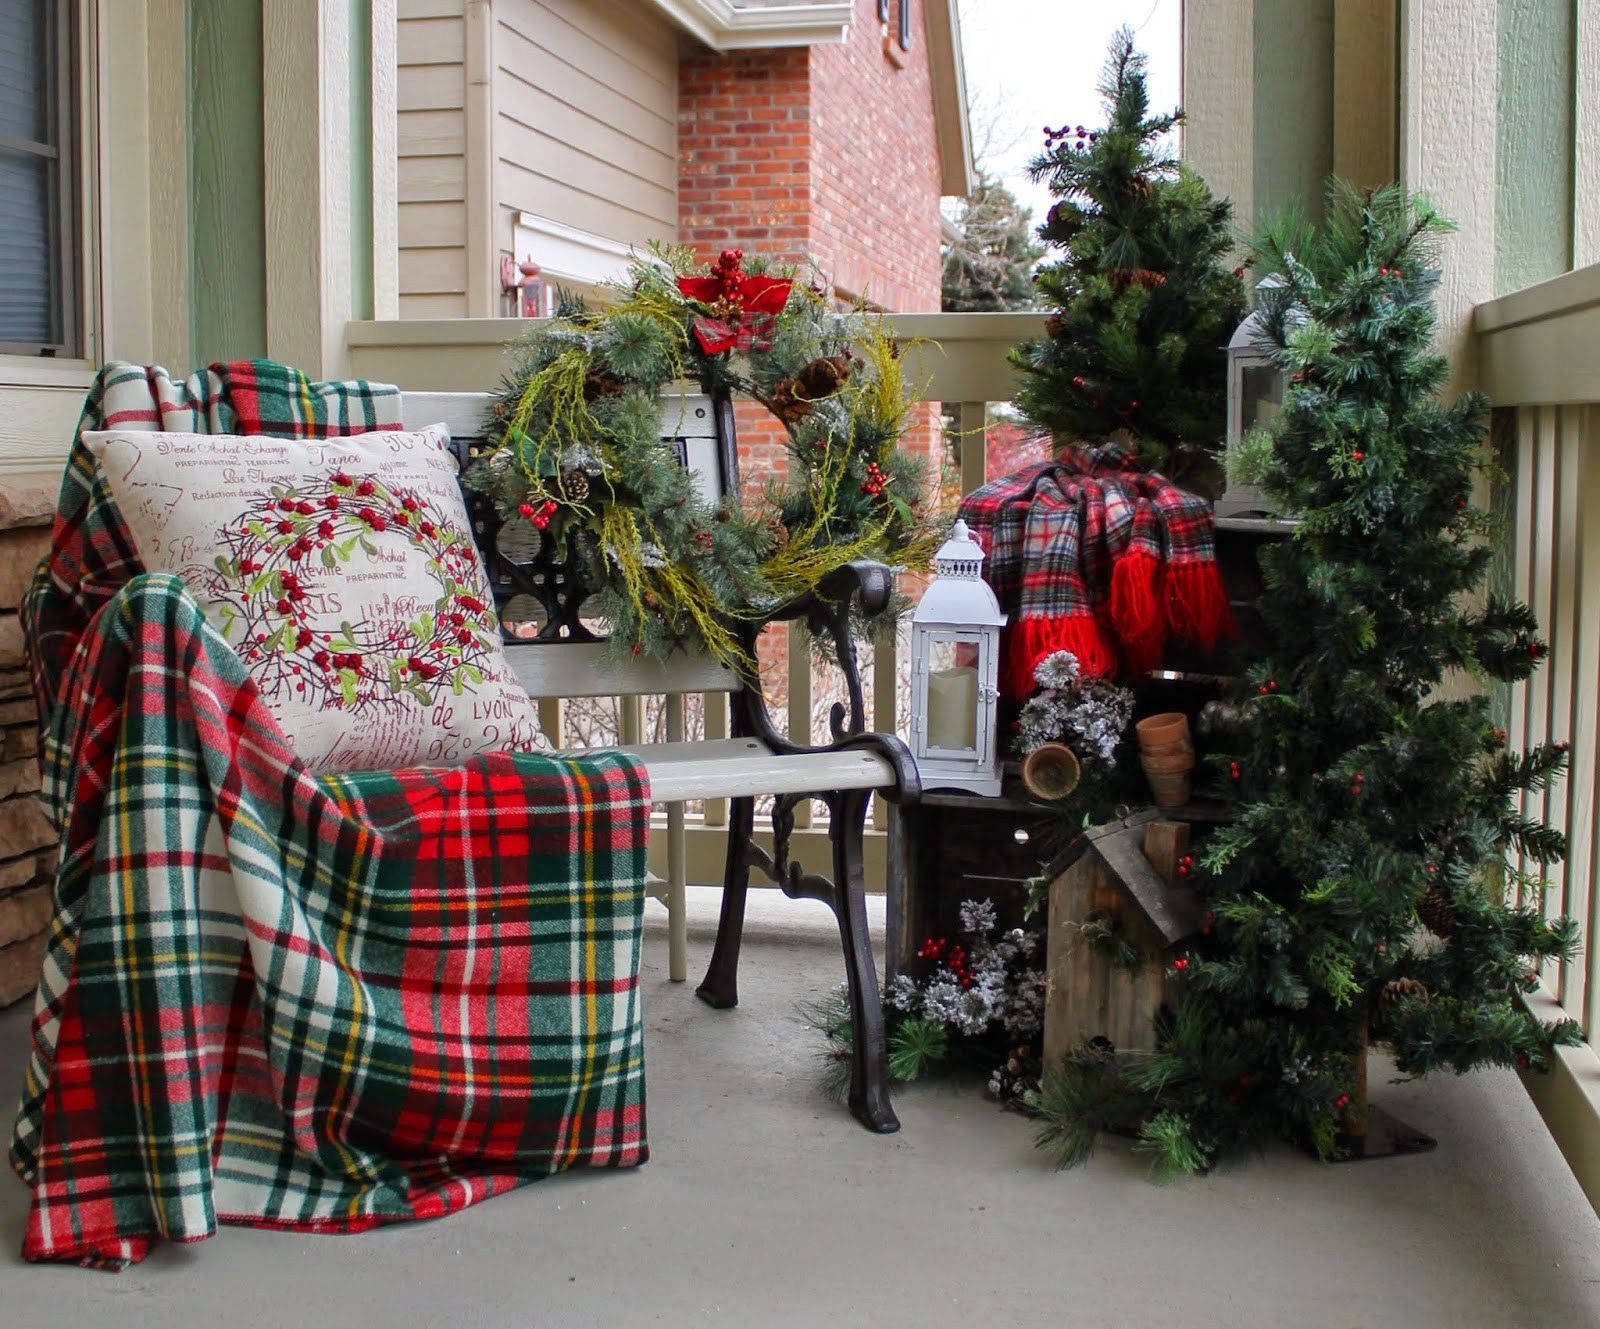 Wonderful Christmas Balcony Decor Ideas To Spice It Up For The Holidays.